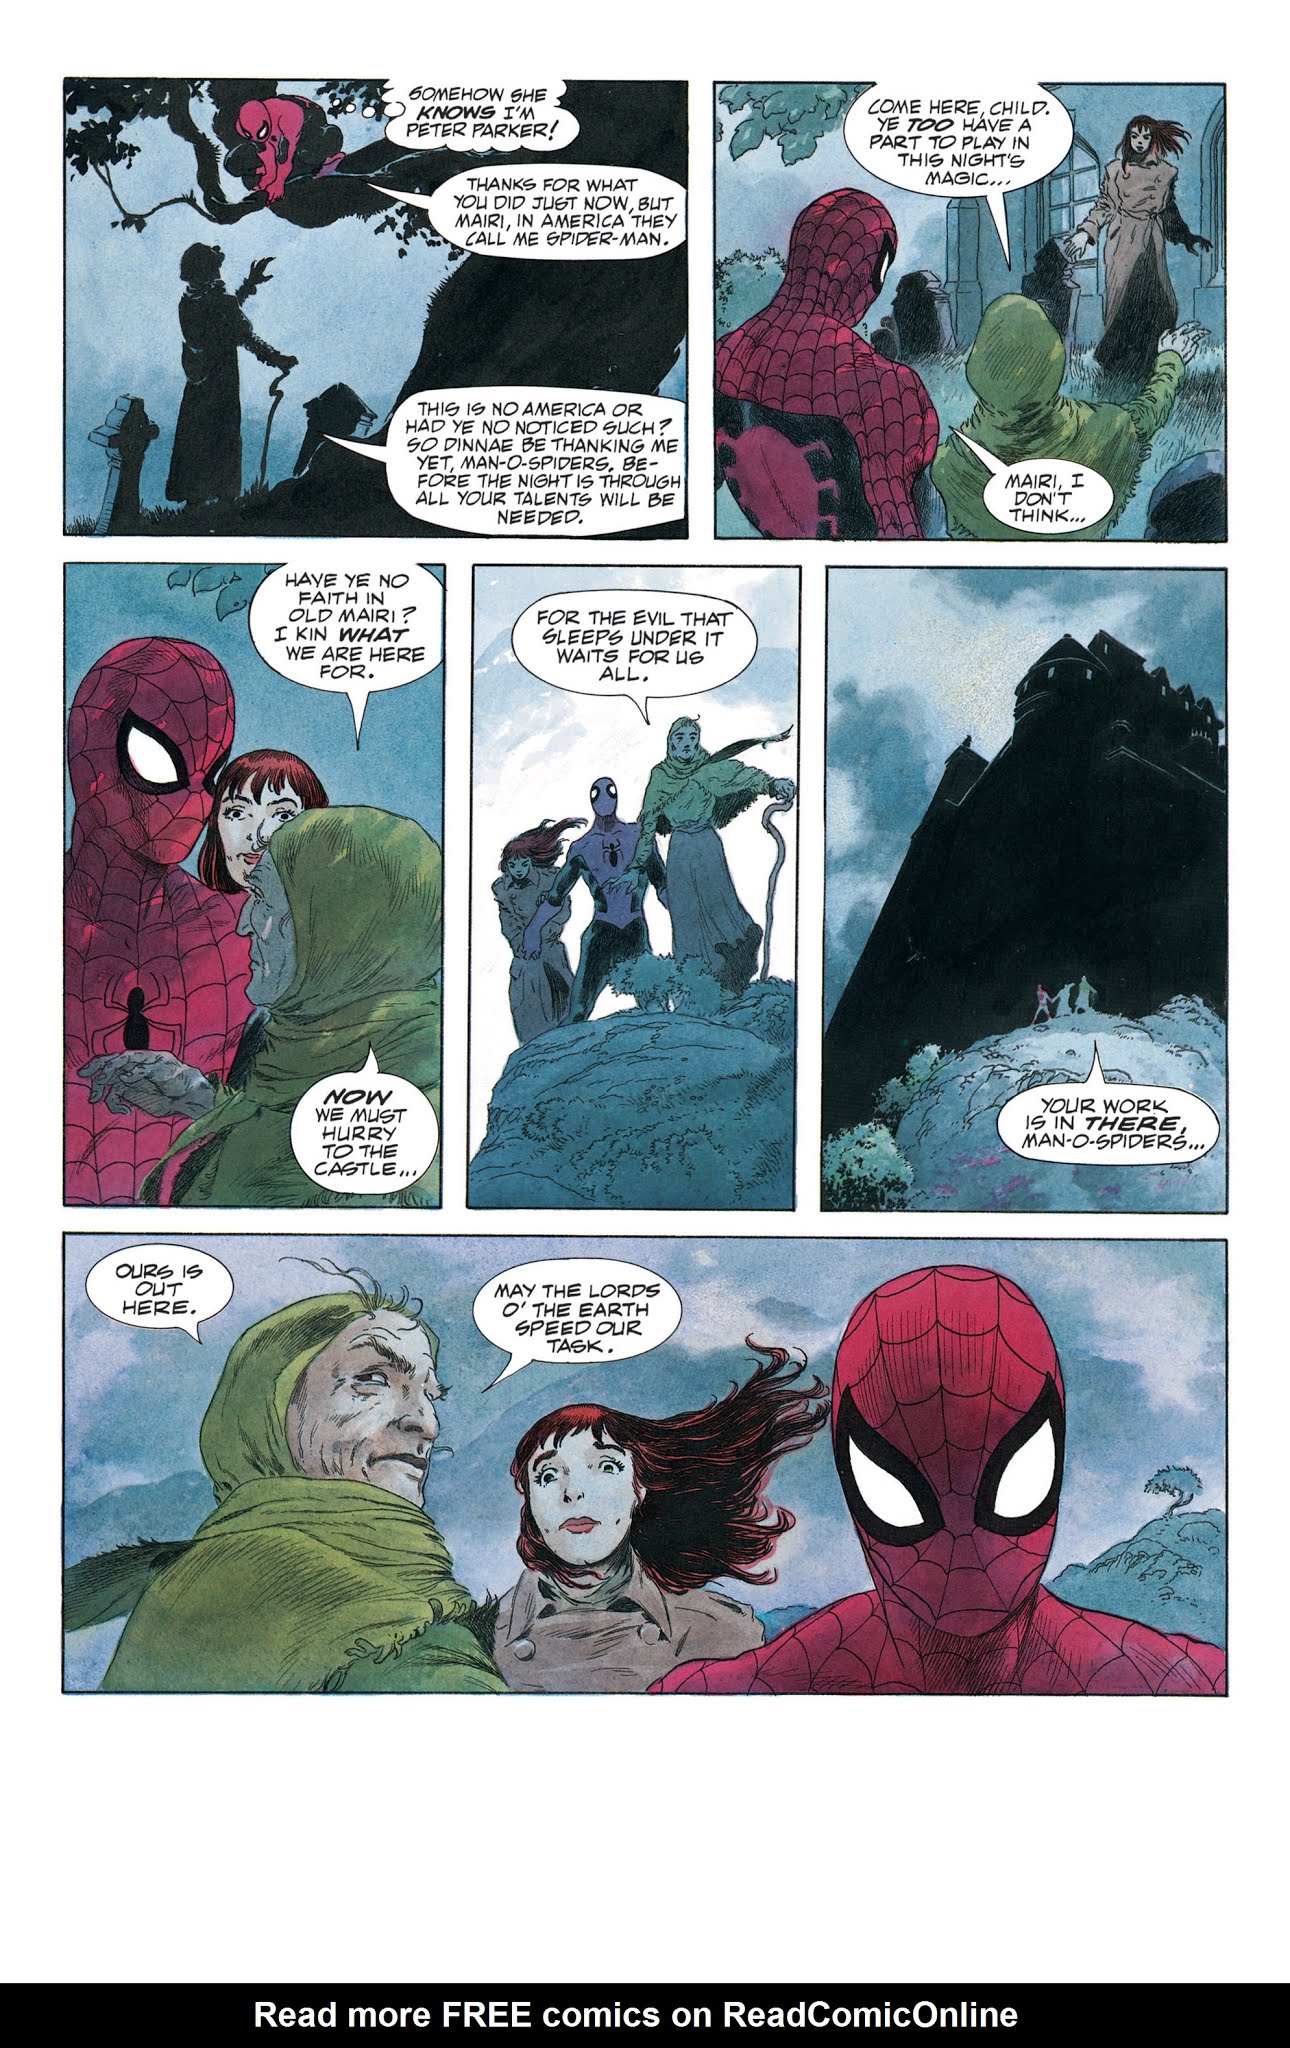 Read online Spider-Man: Spirits of the Earth comic -  Issue # TPB - 41